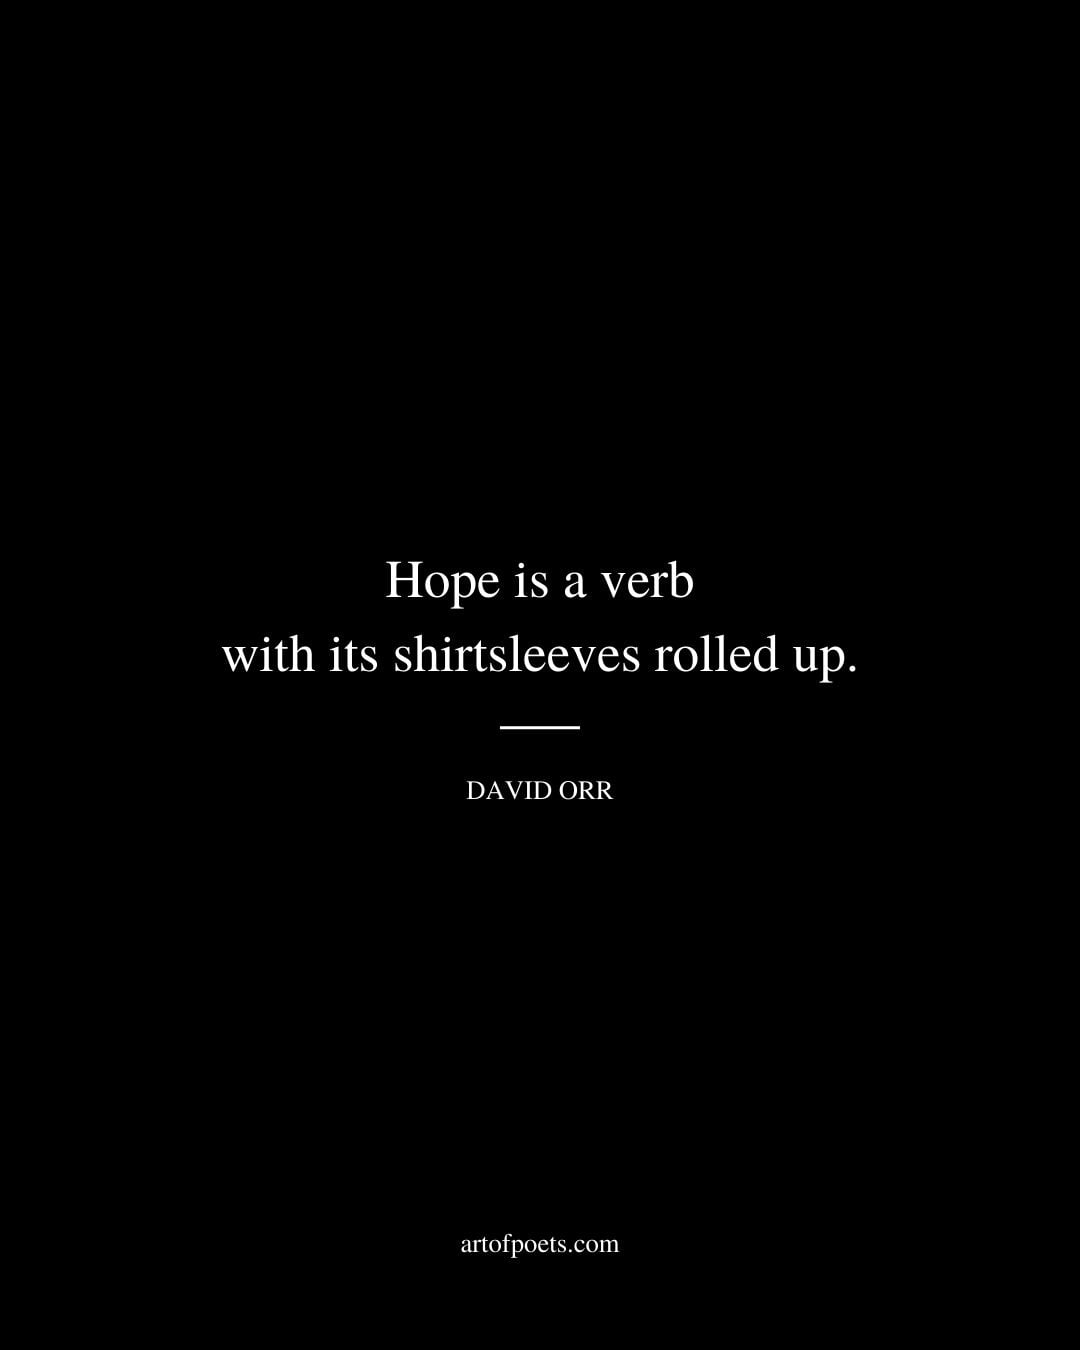 Hope is a verb with its shirtsleeves rolled up. David Orr